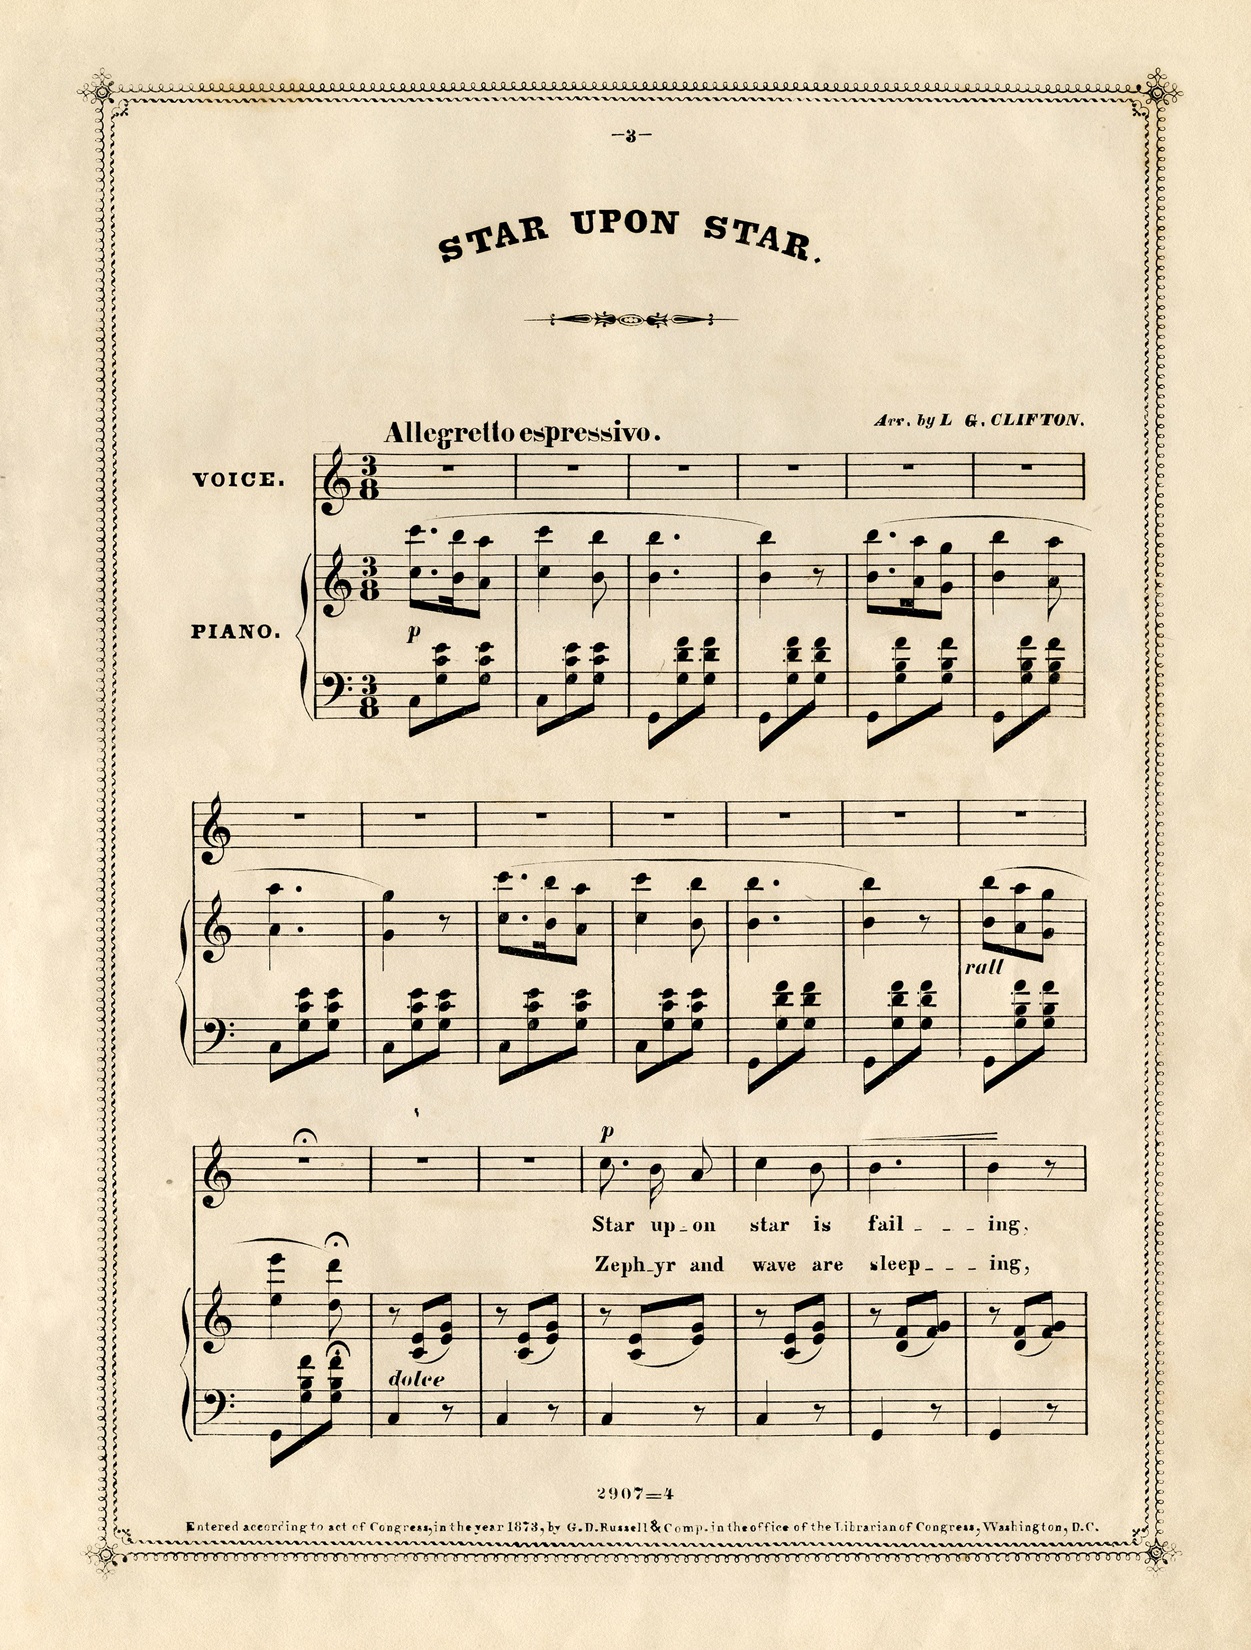 Free Vintage Sheet Music - The Graphics Fairy